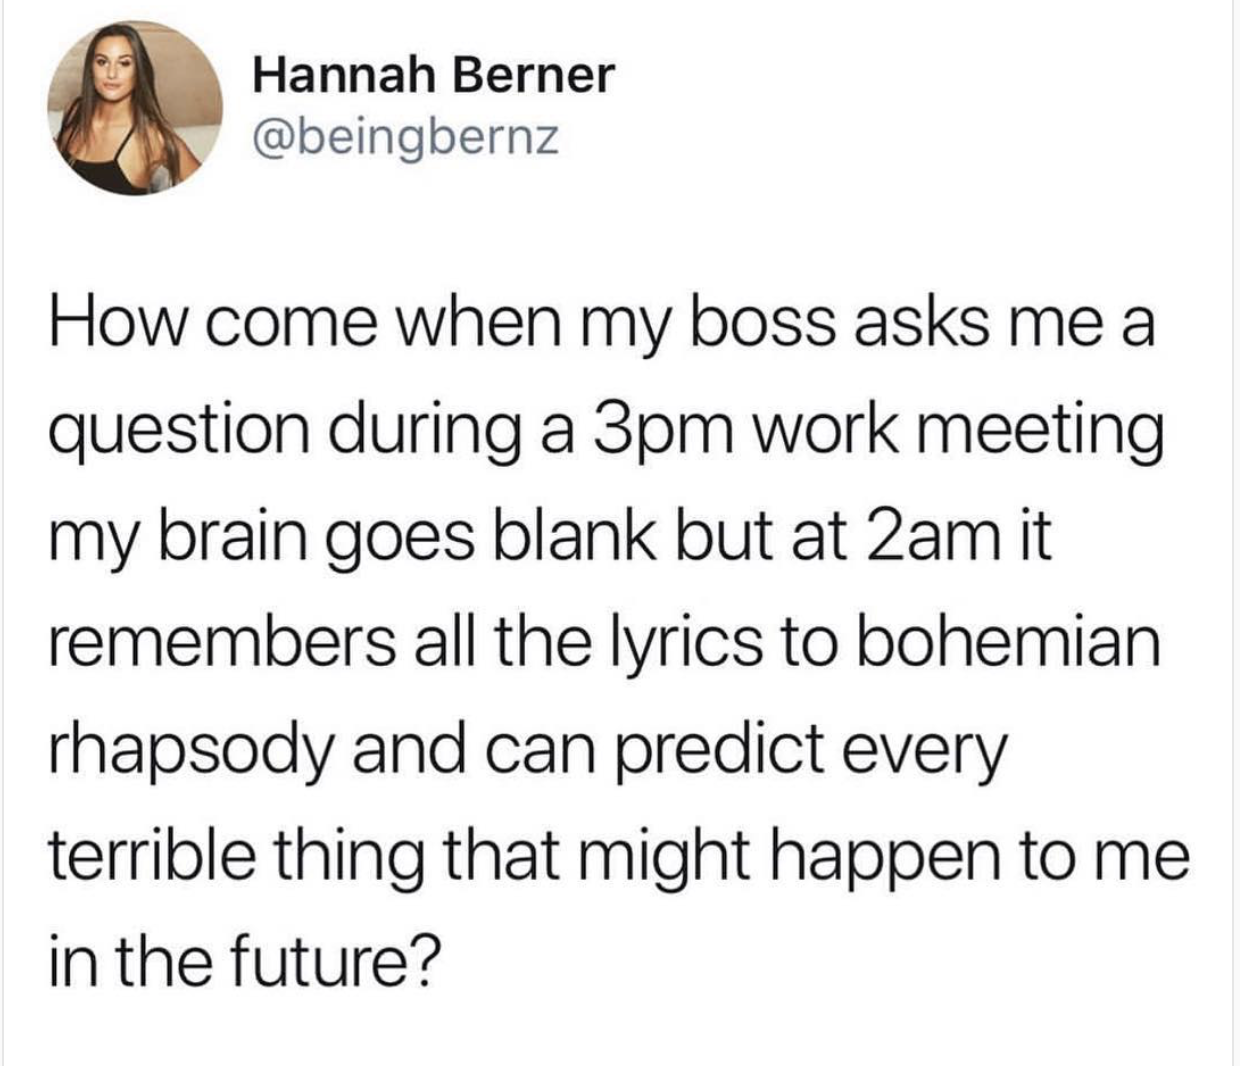 didn t believe that love is blind - Hannah Berner How come when my boss asks me a question during a 3pm work meeting my brain goes blank but at 2am it remembers all the lyrics to bohemian rhapsody and can predict every terrible thing that might happen to 